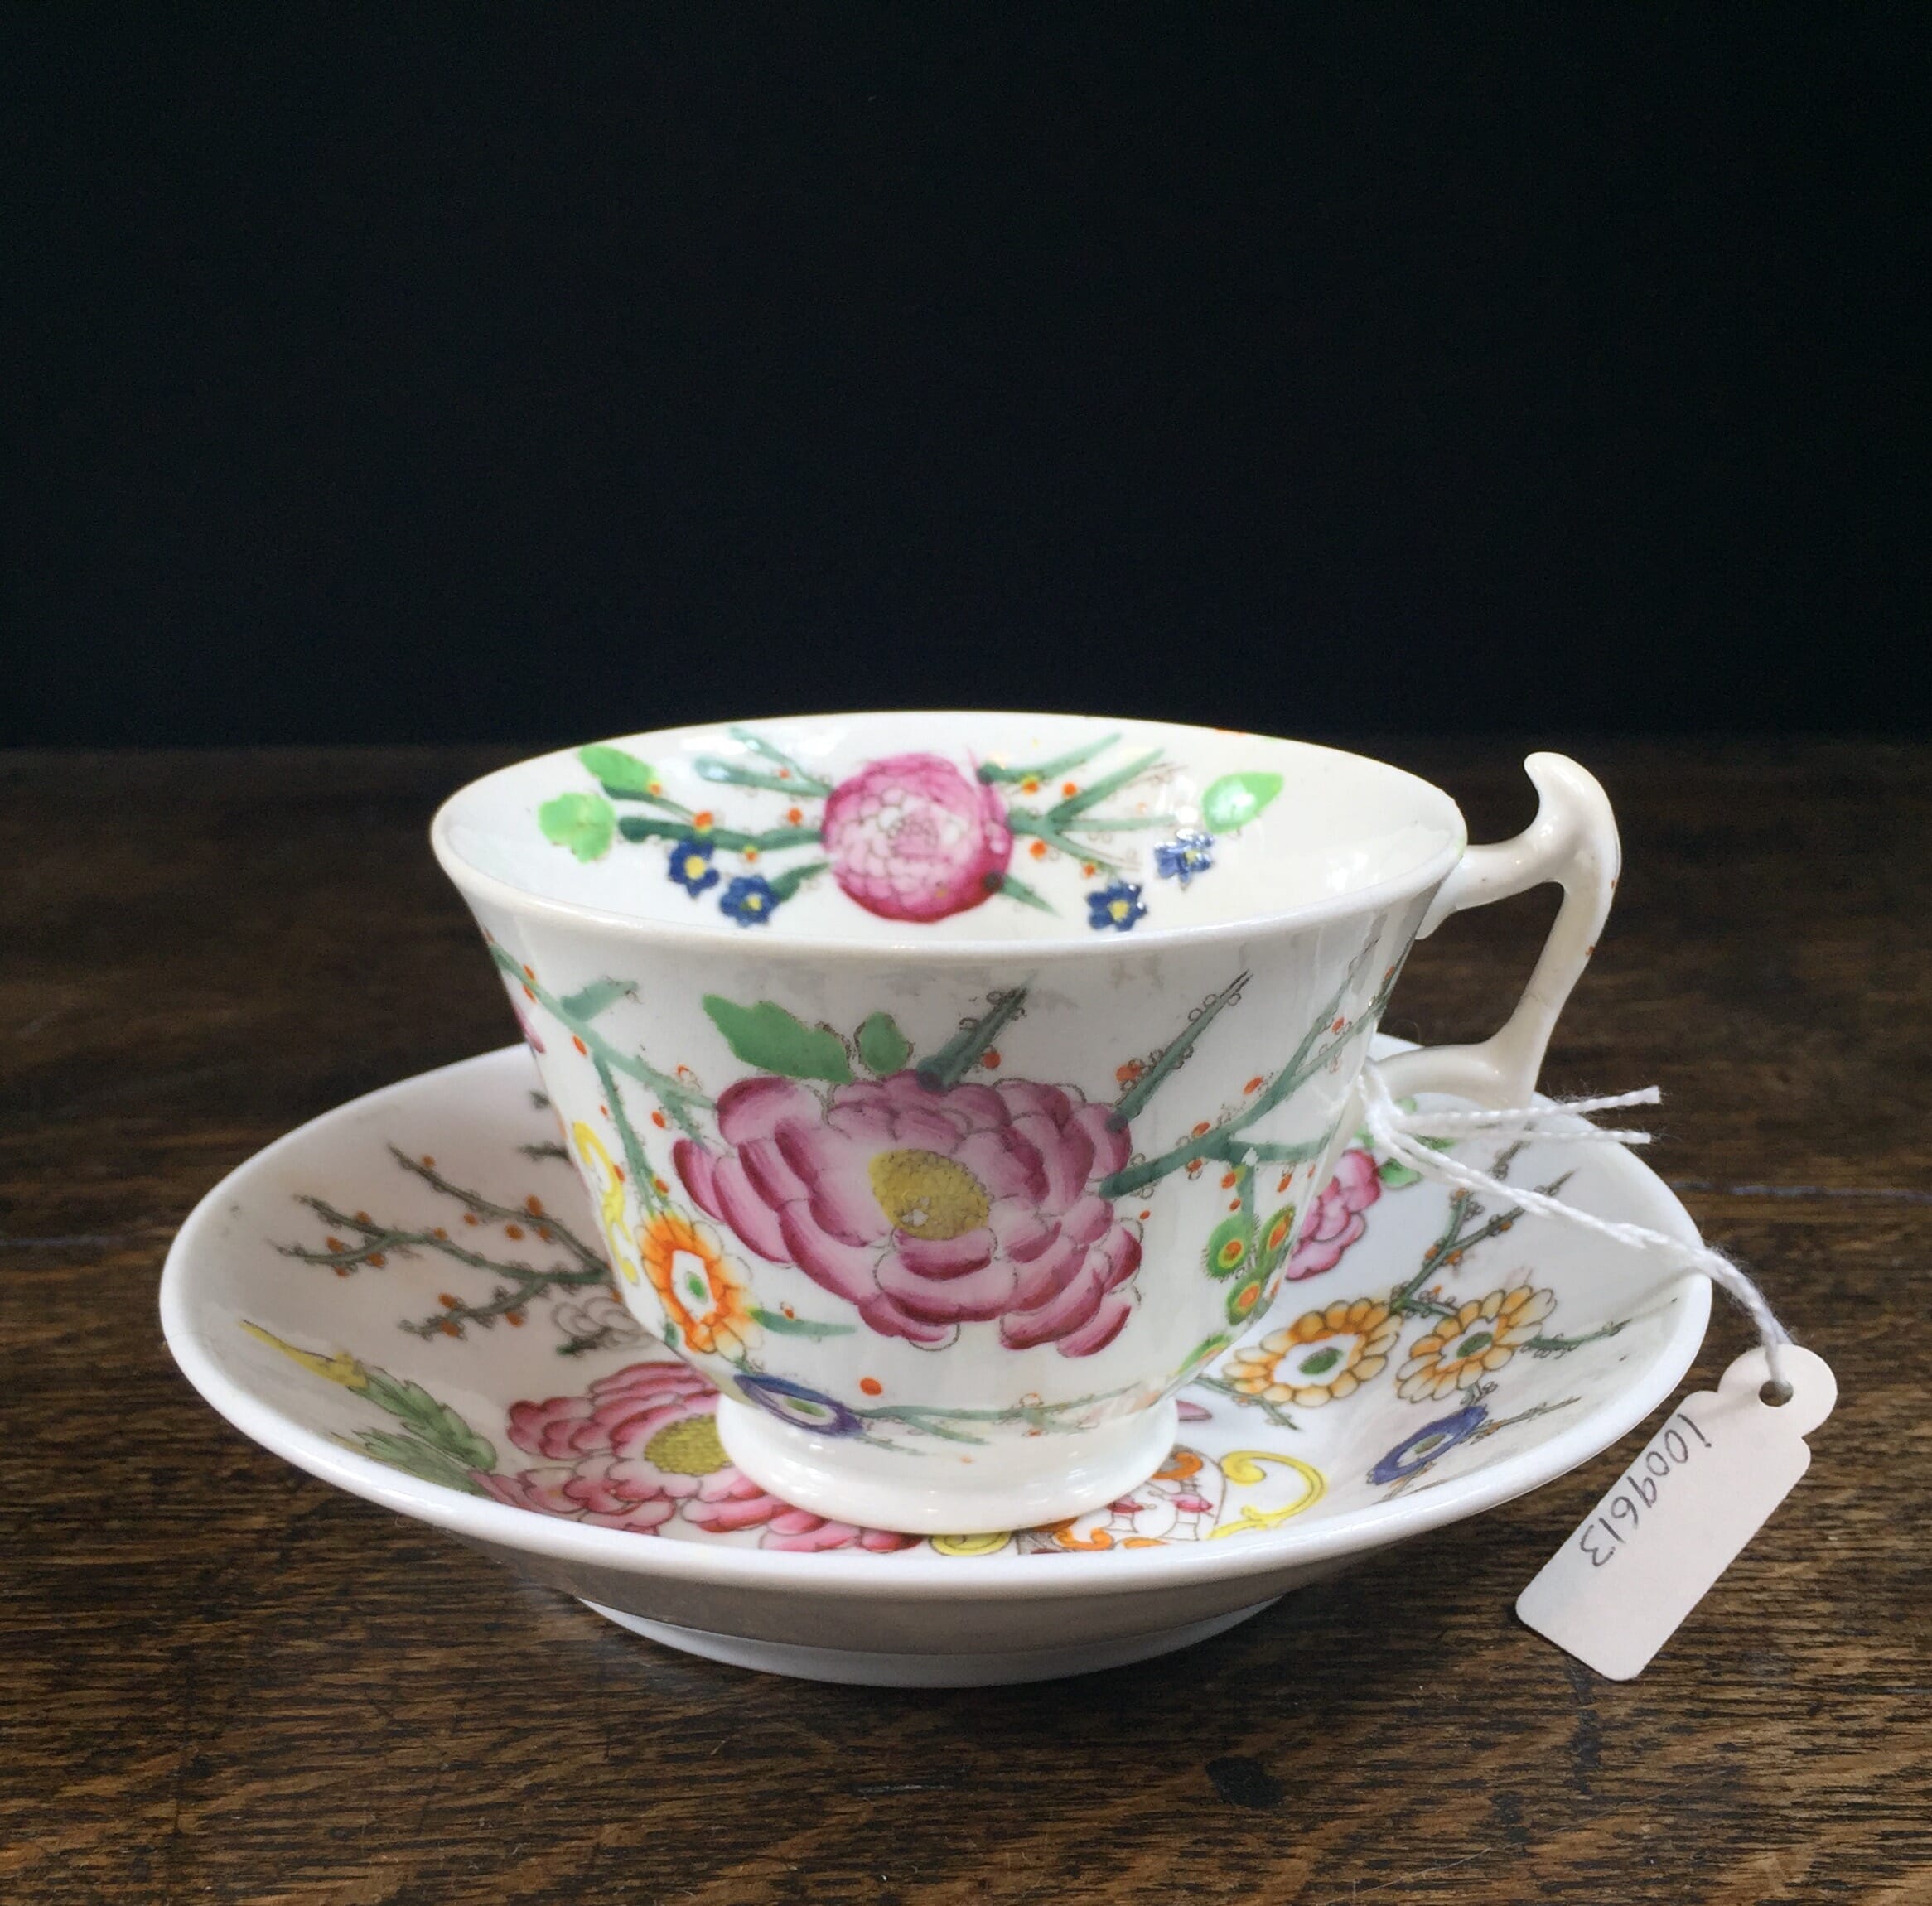 Hildich & Son cup & saucer, bright Chinese vase pattern, C. 1830 -0